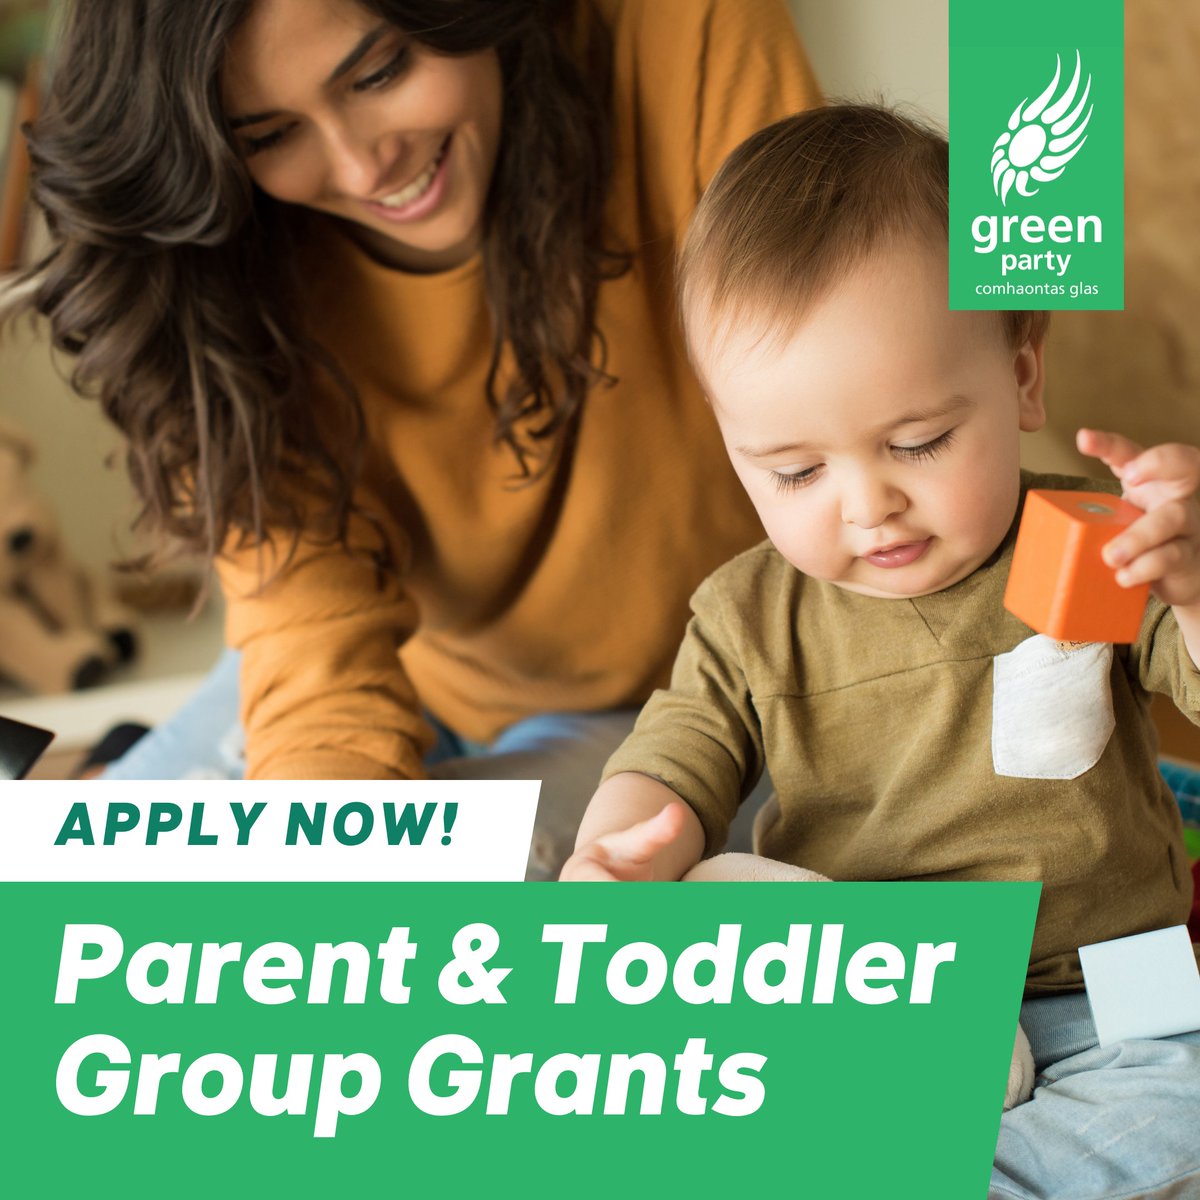 Minister @rodericogorman has announced details of the grants available to Parent and Toddler Groups under the 2022 Grants Initiative. Apply now for grants for: 🧸 Toys ✍️️ Training 🎨 Activities 👨‍👩‍👧 Buggy Walking Groups and additional sessions! 👉 gov.ie/en/press-relea…